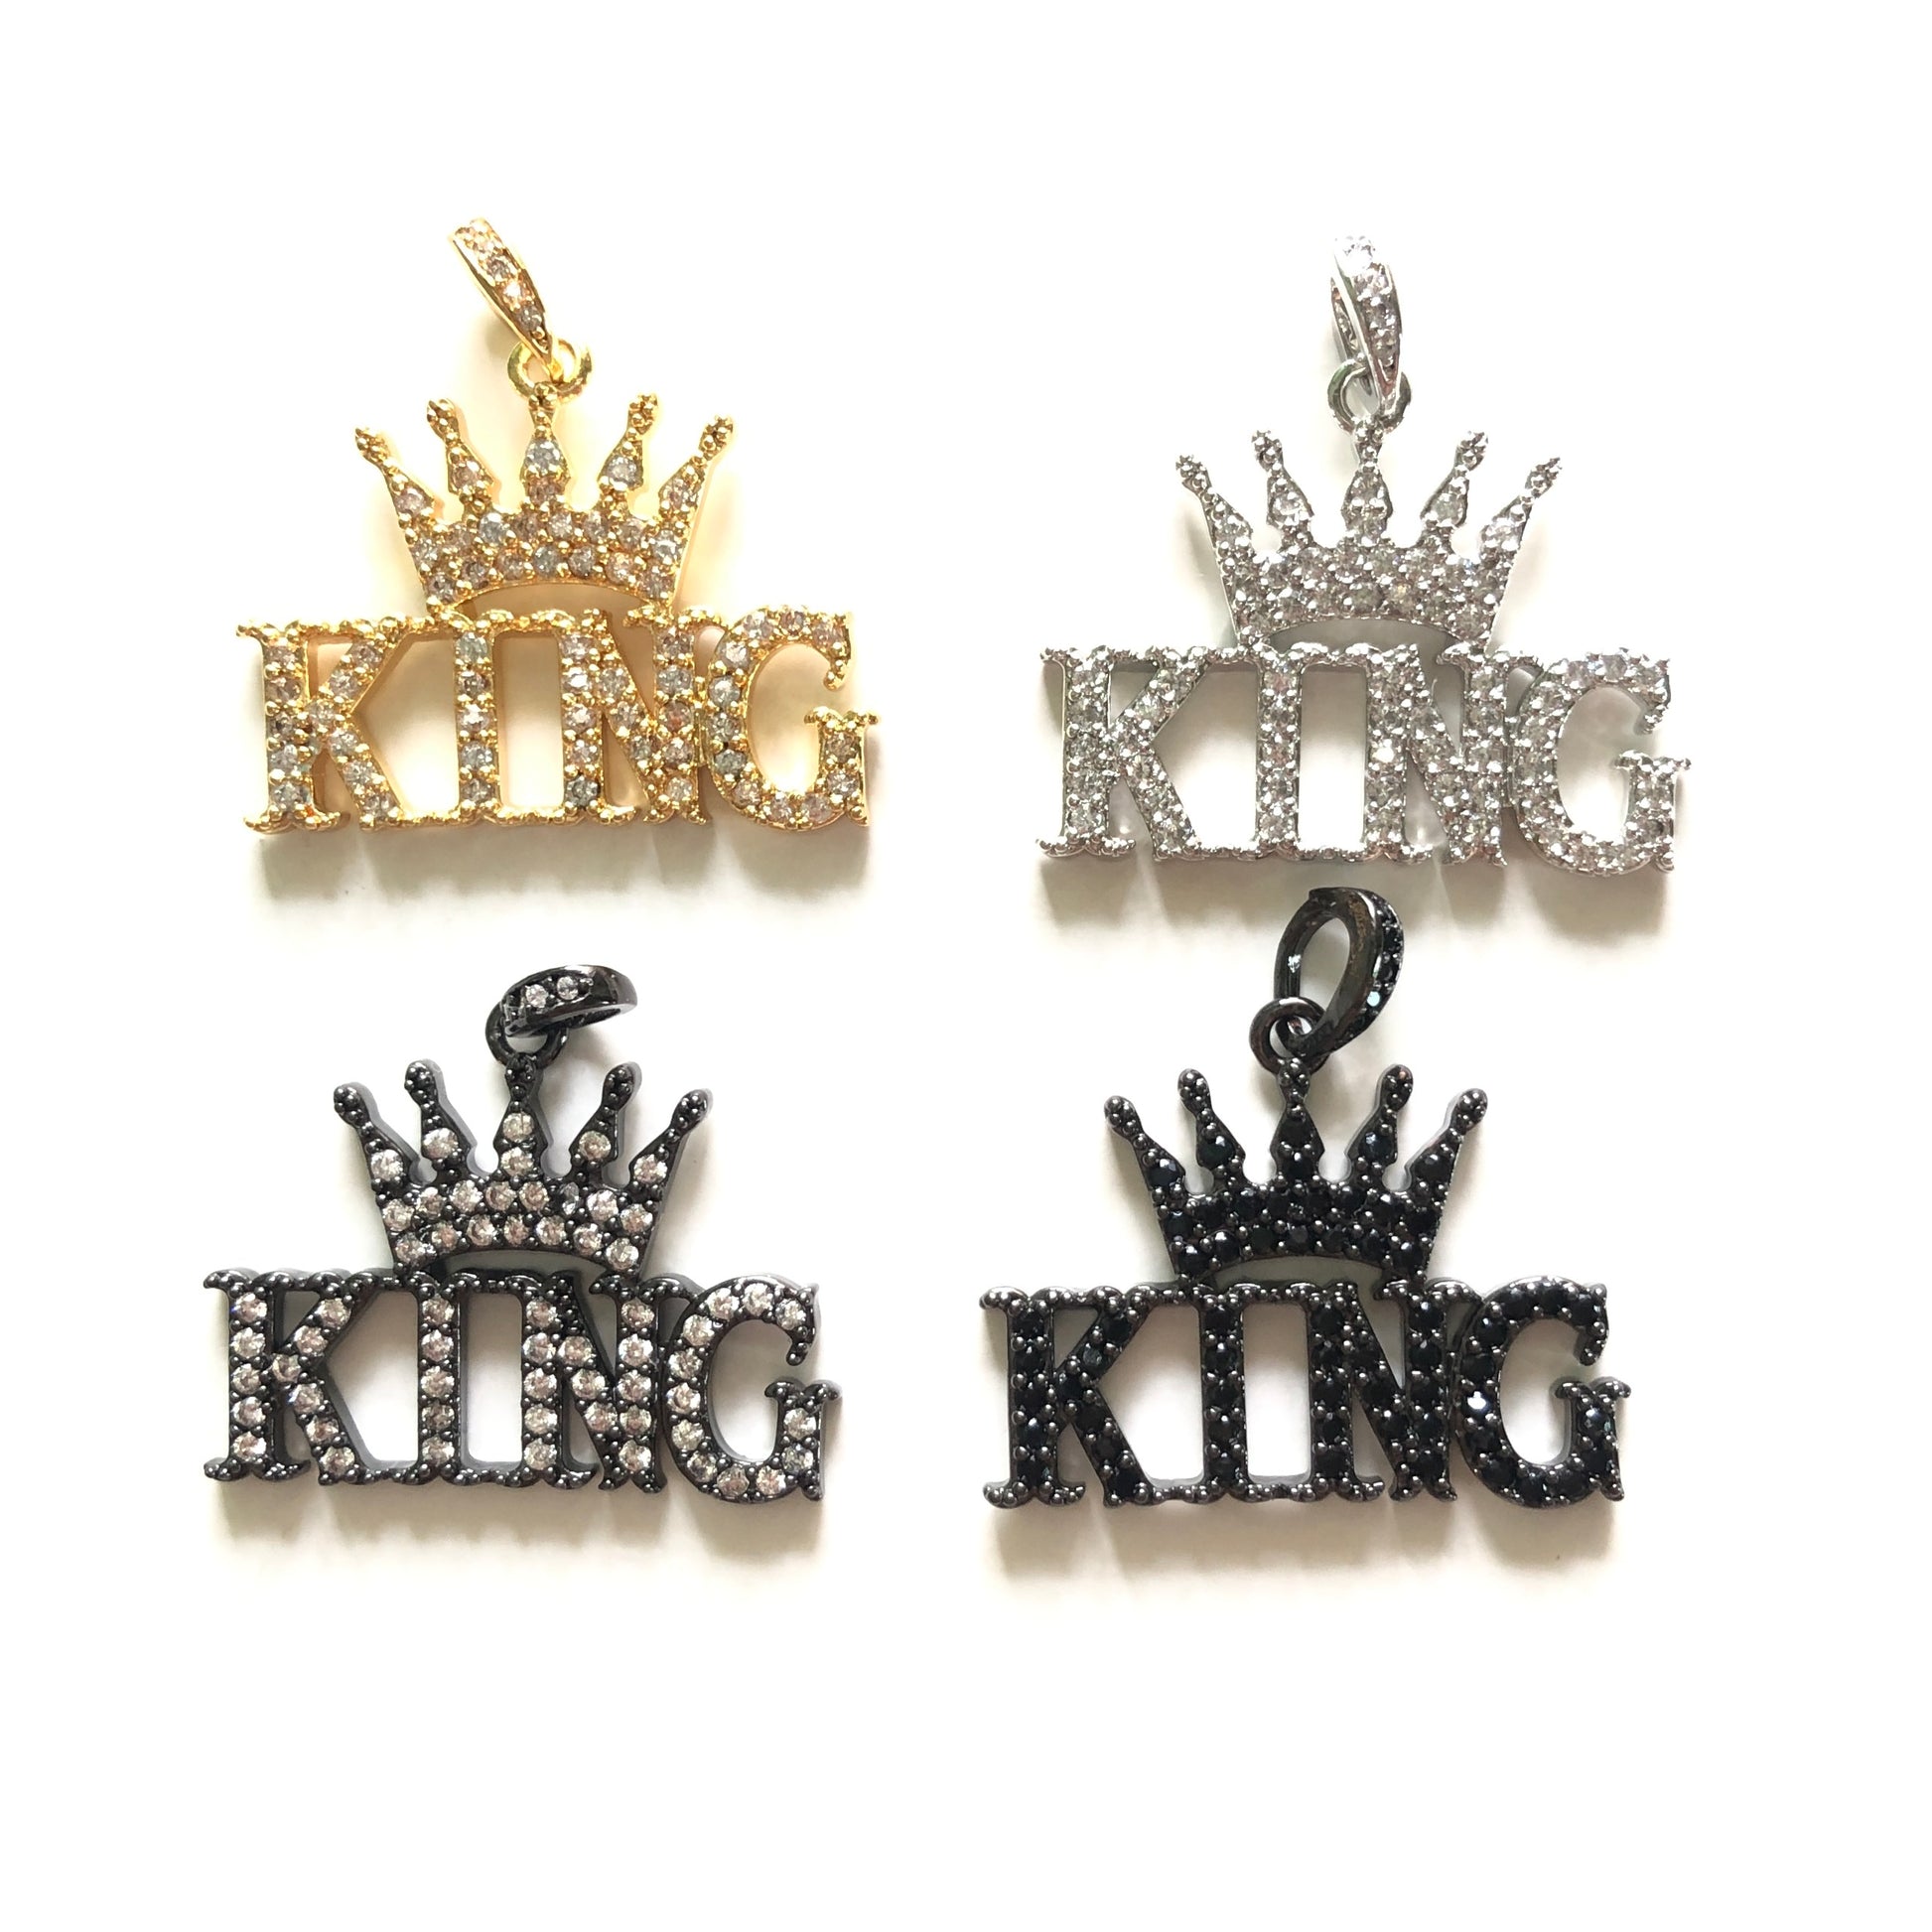 10pcs/lot 26mm*18 CZ Paved King Charms CZ Paved Charms Words & Quotes Charms Beads Beyond